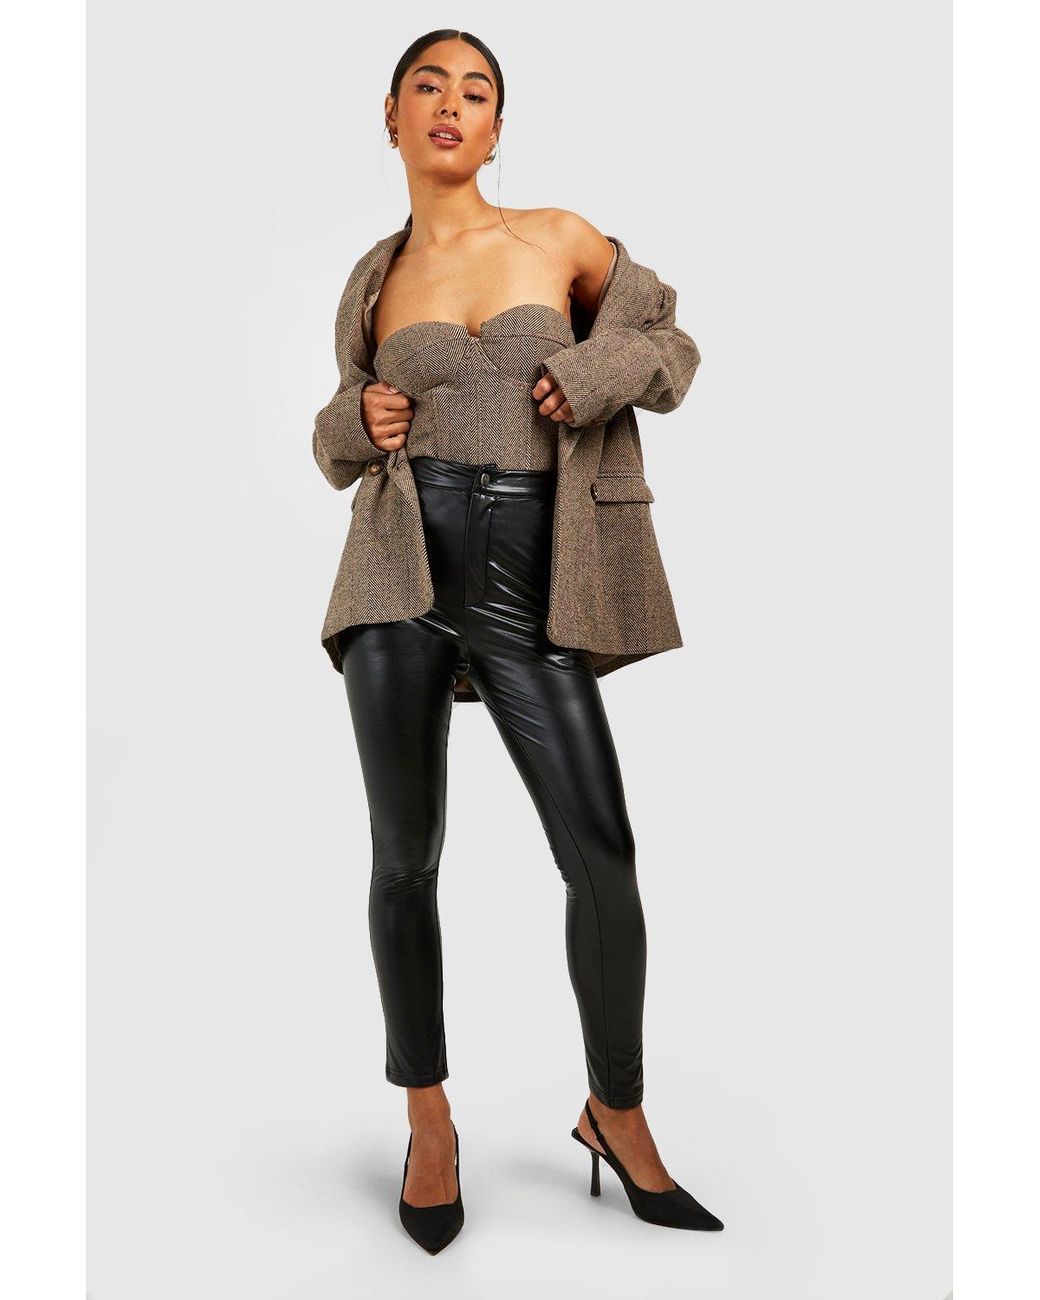 Boohoo Leather Look Super Stretch Skinny Trousers in Black